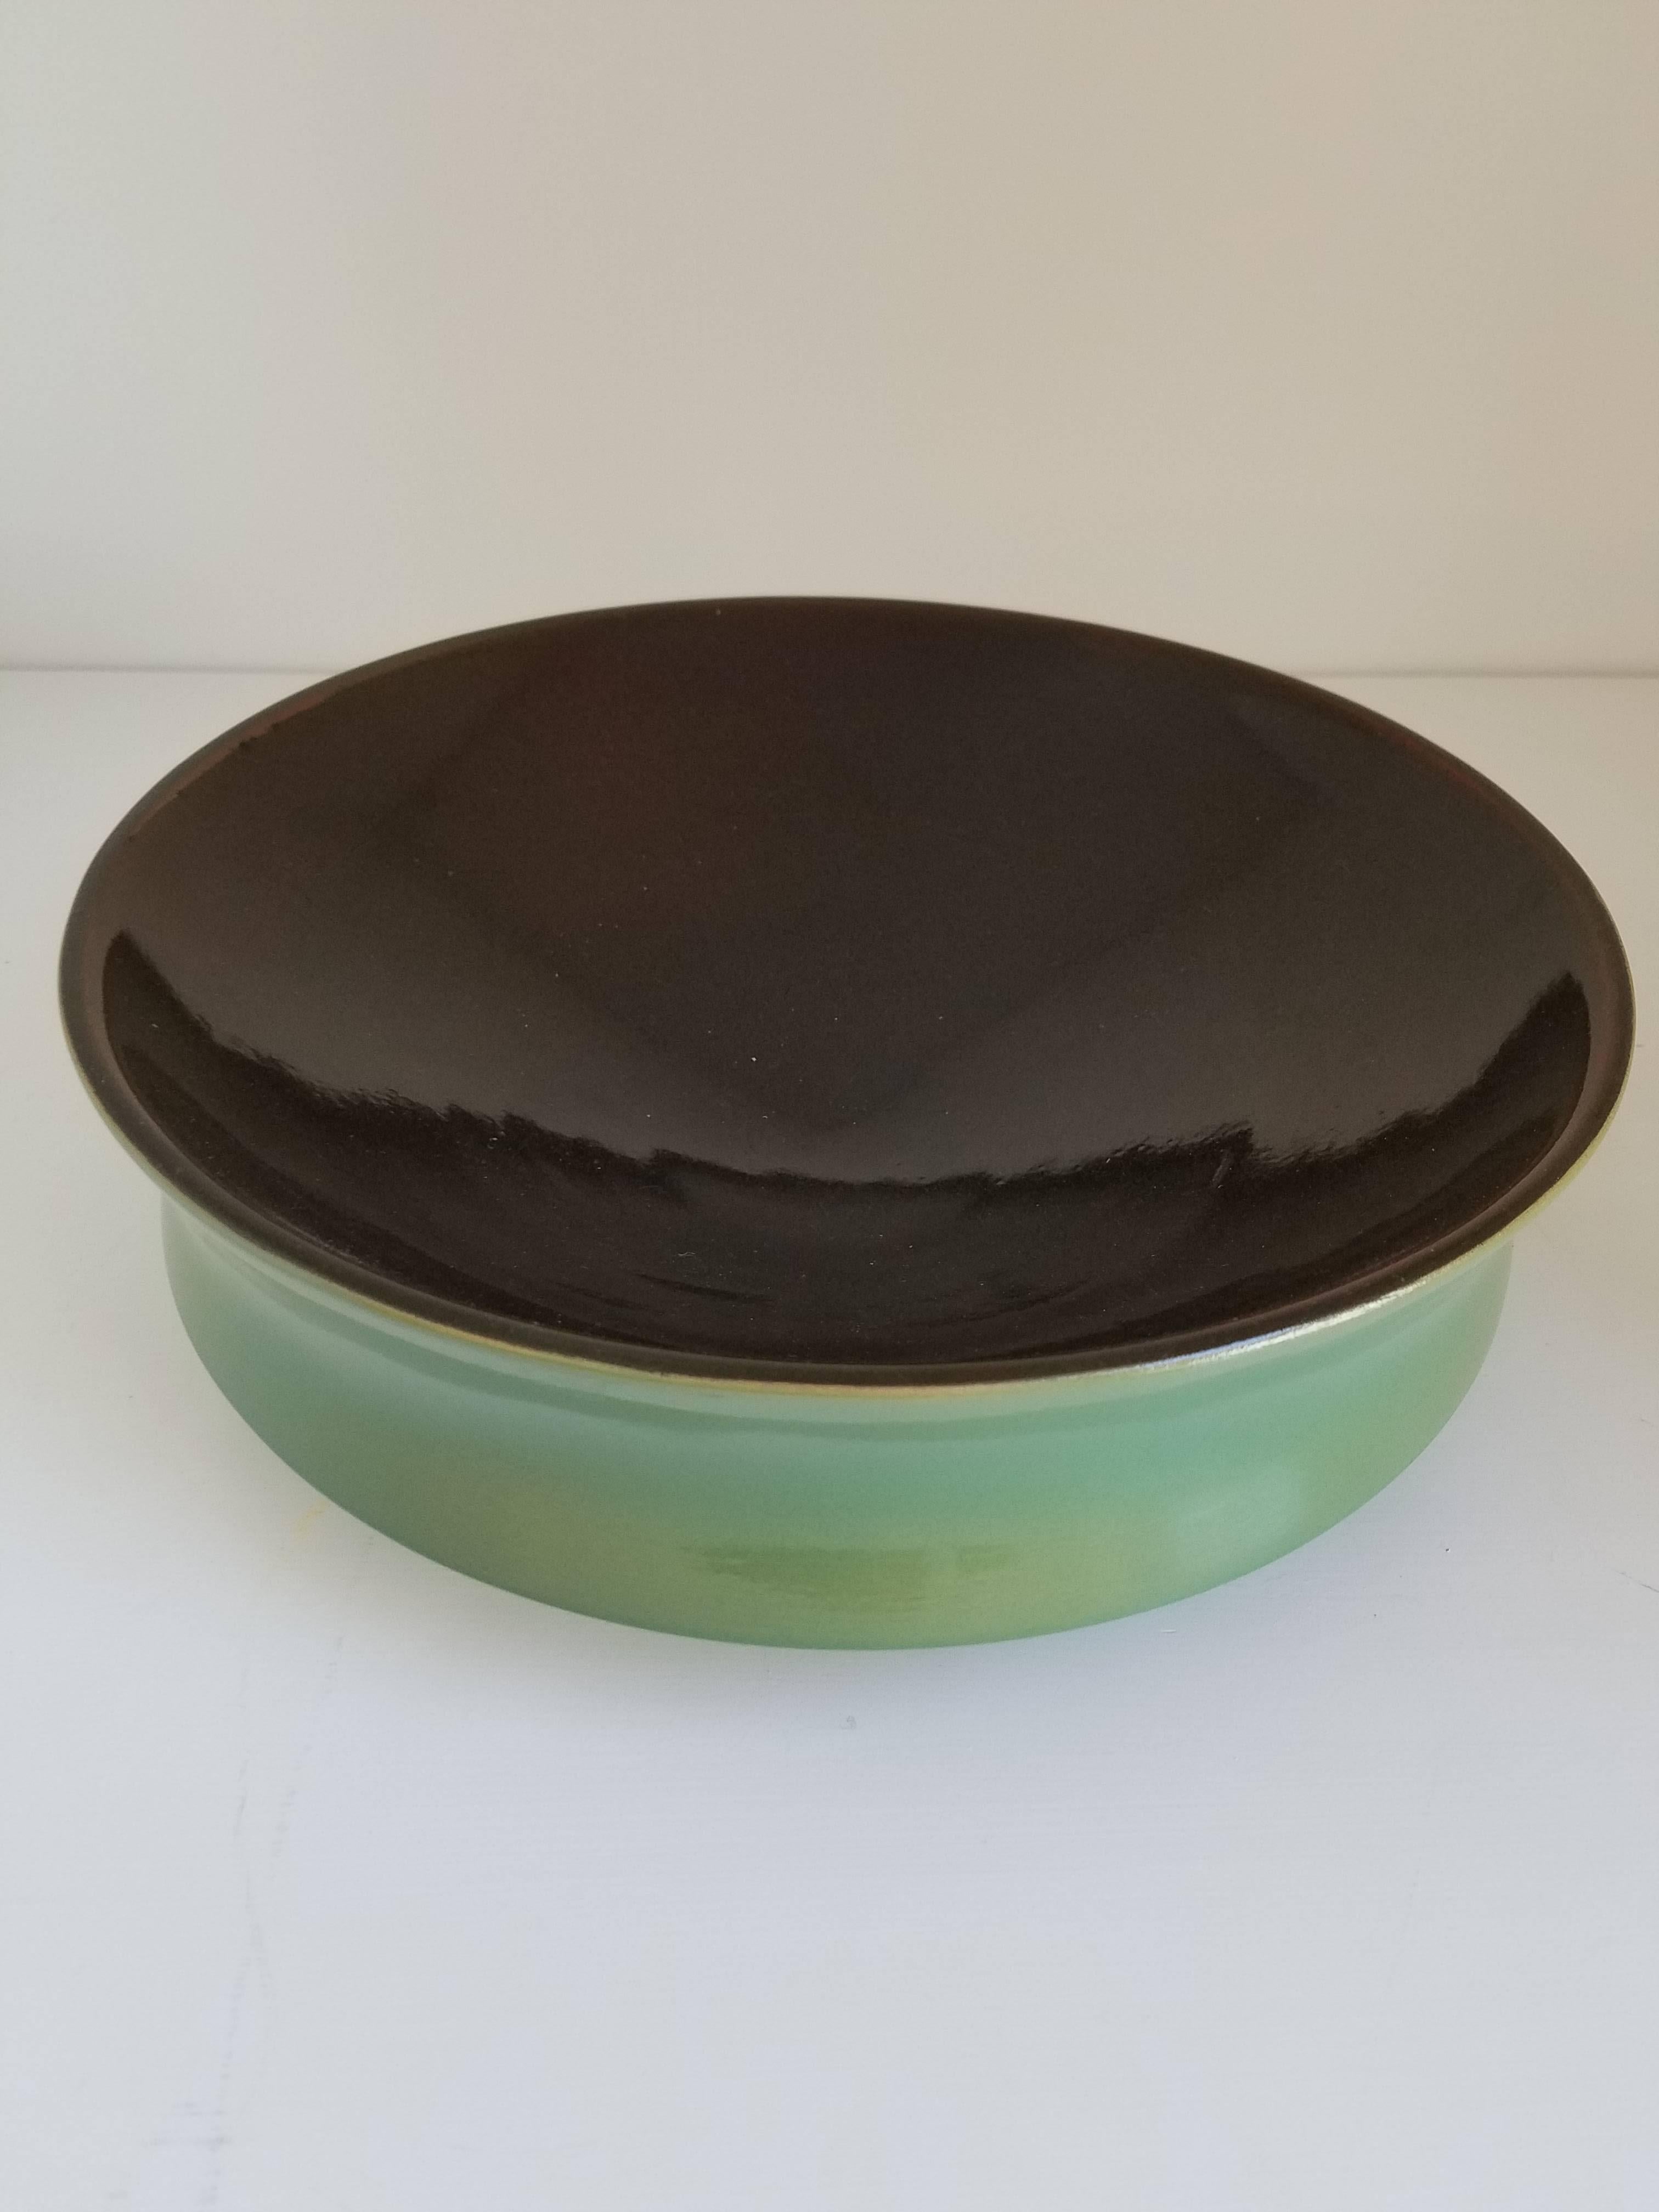 Hand thrown double glazed ceramic bowl with indented curved sides and contrast color glaze.